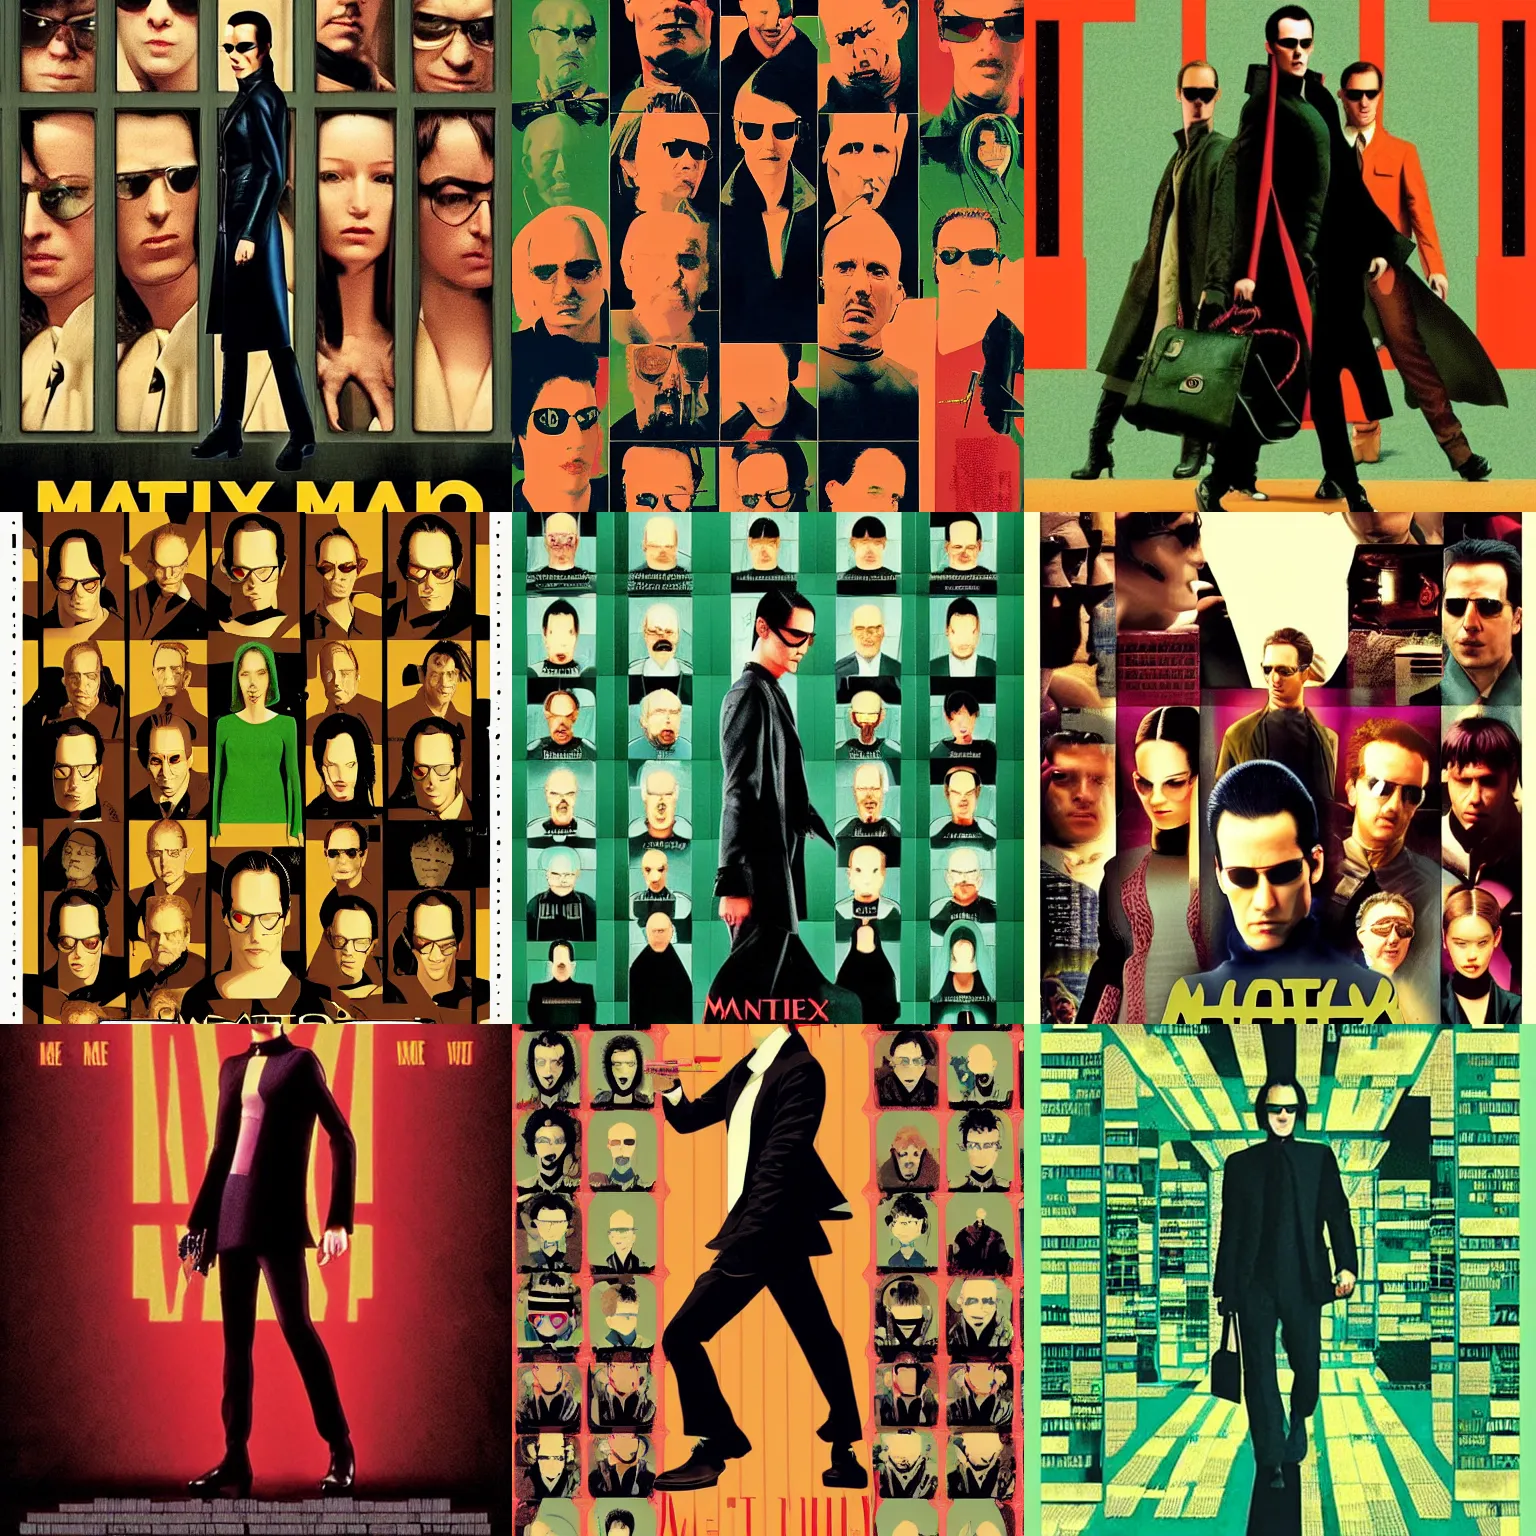 Prompt: matrix movie poster by wes anderson